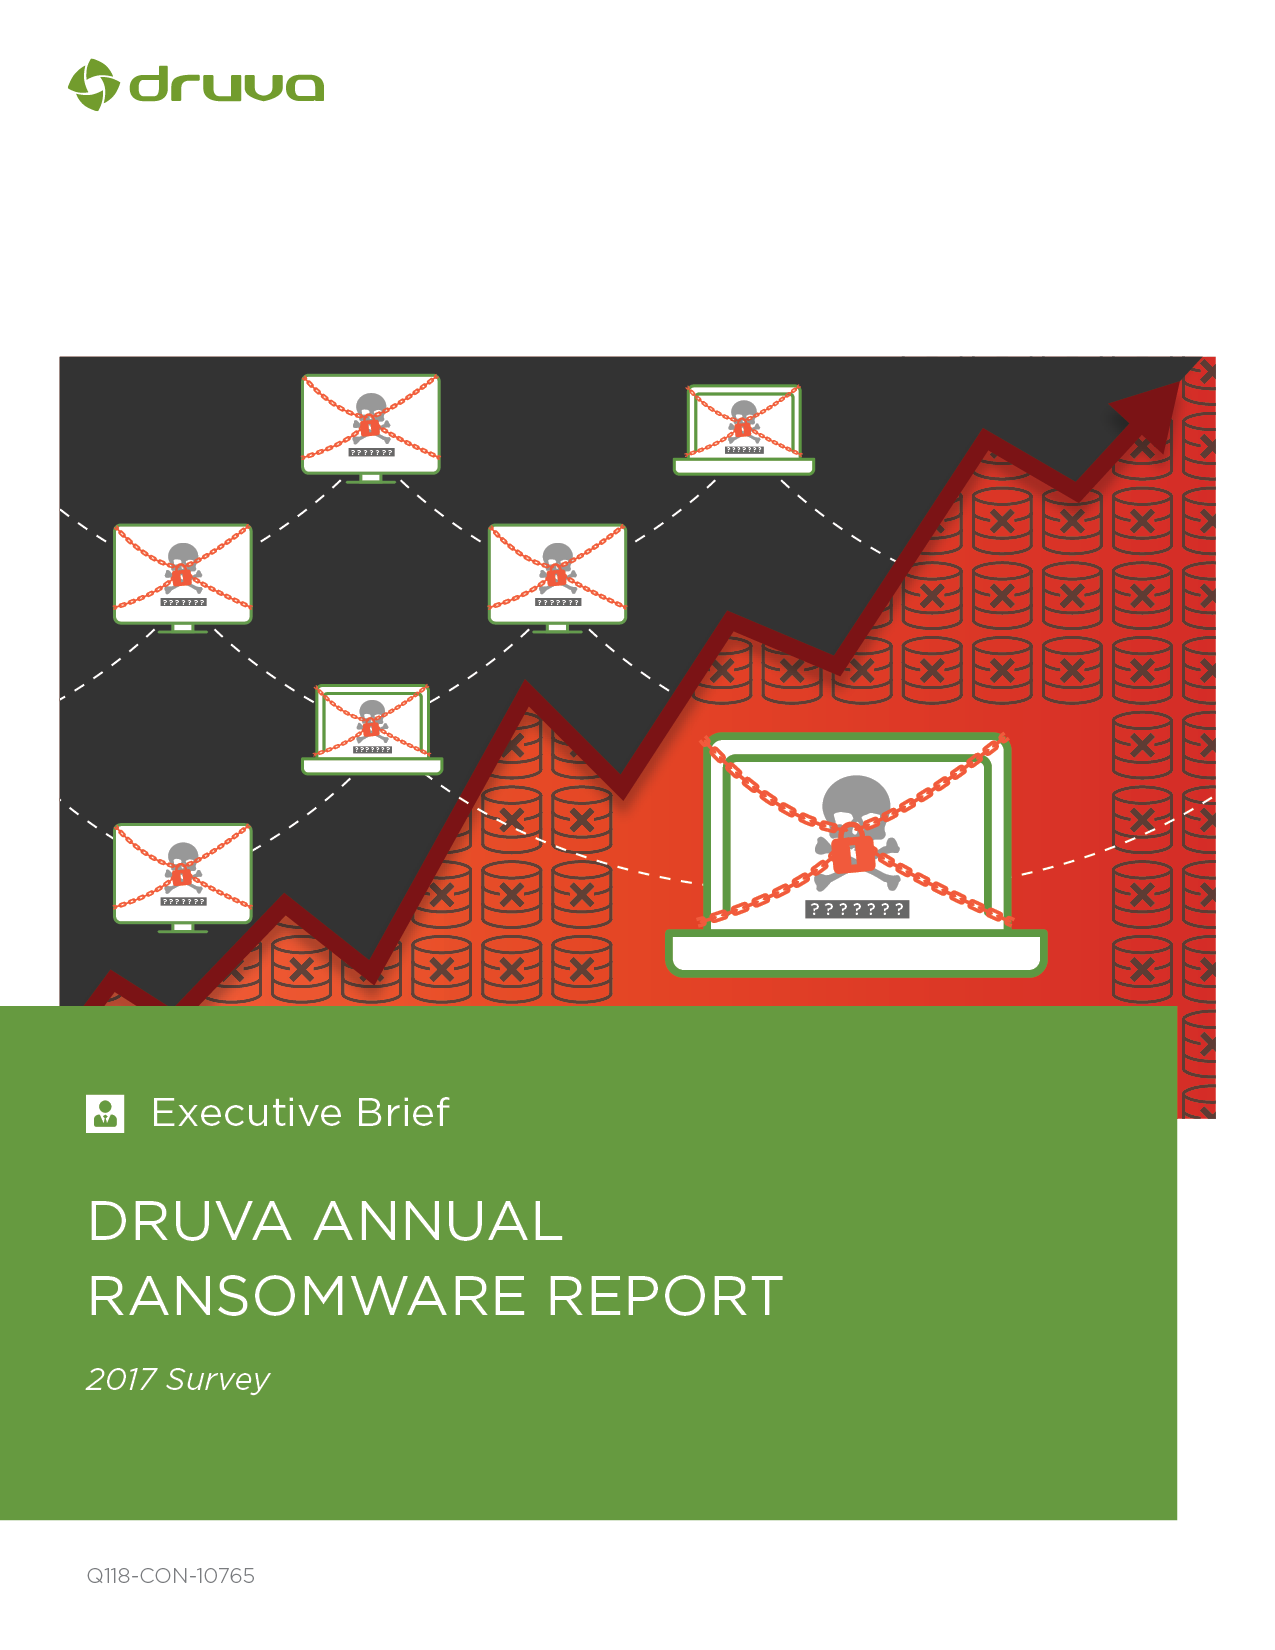 You’ve Got Ransomware. Now What?